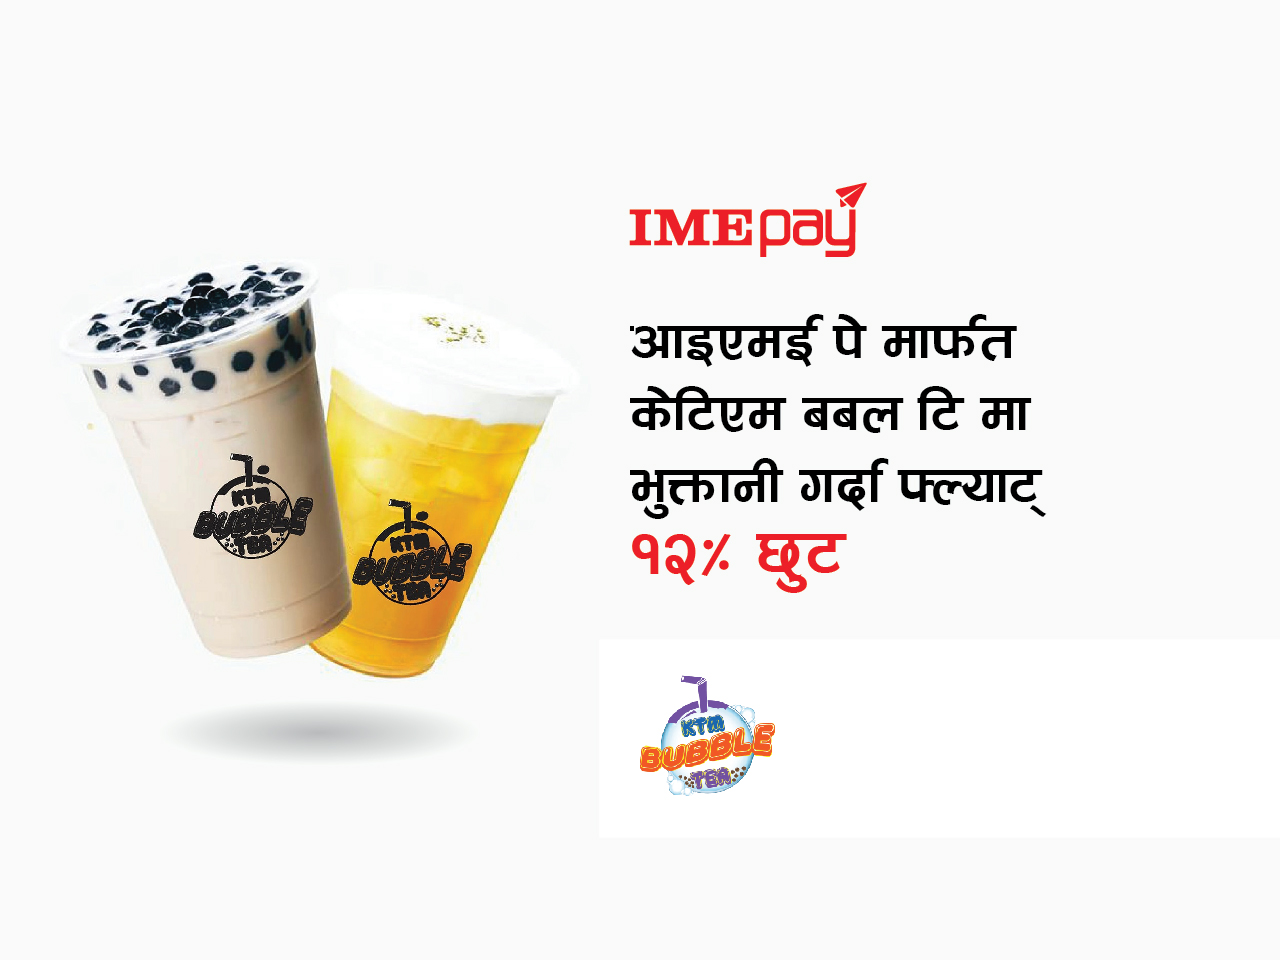 Payment discount on PhonePay QR code scan on KTM Bubble Tea via IME Pay